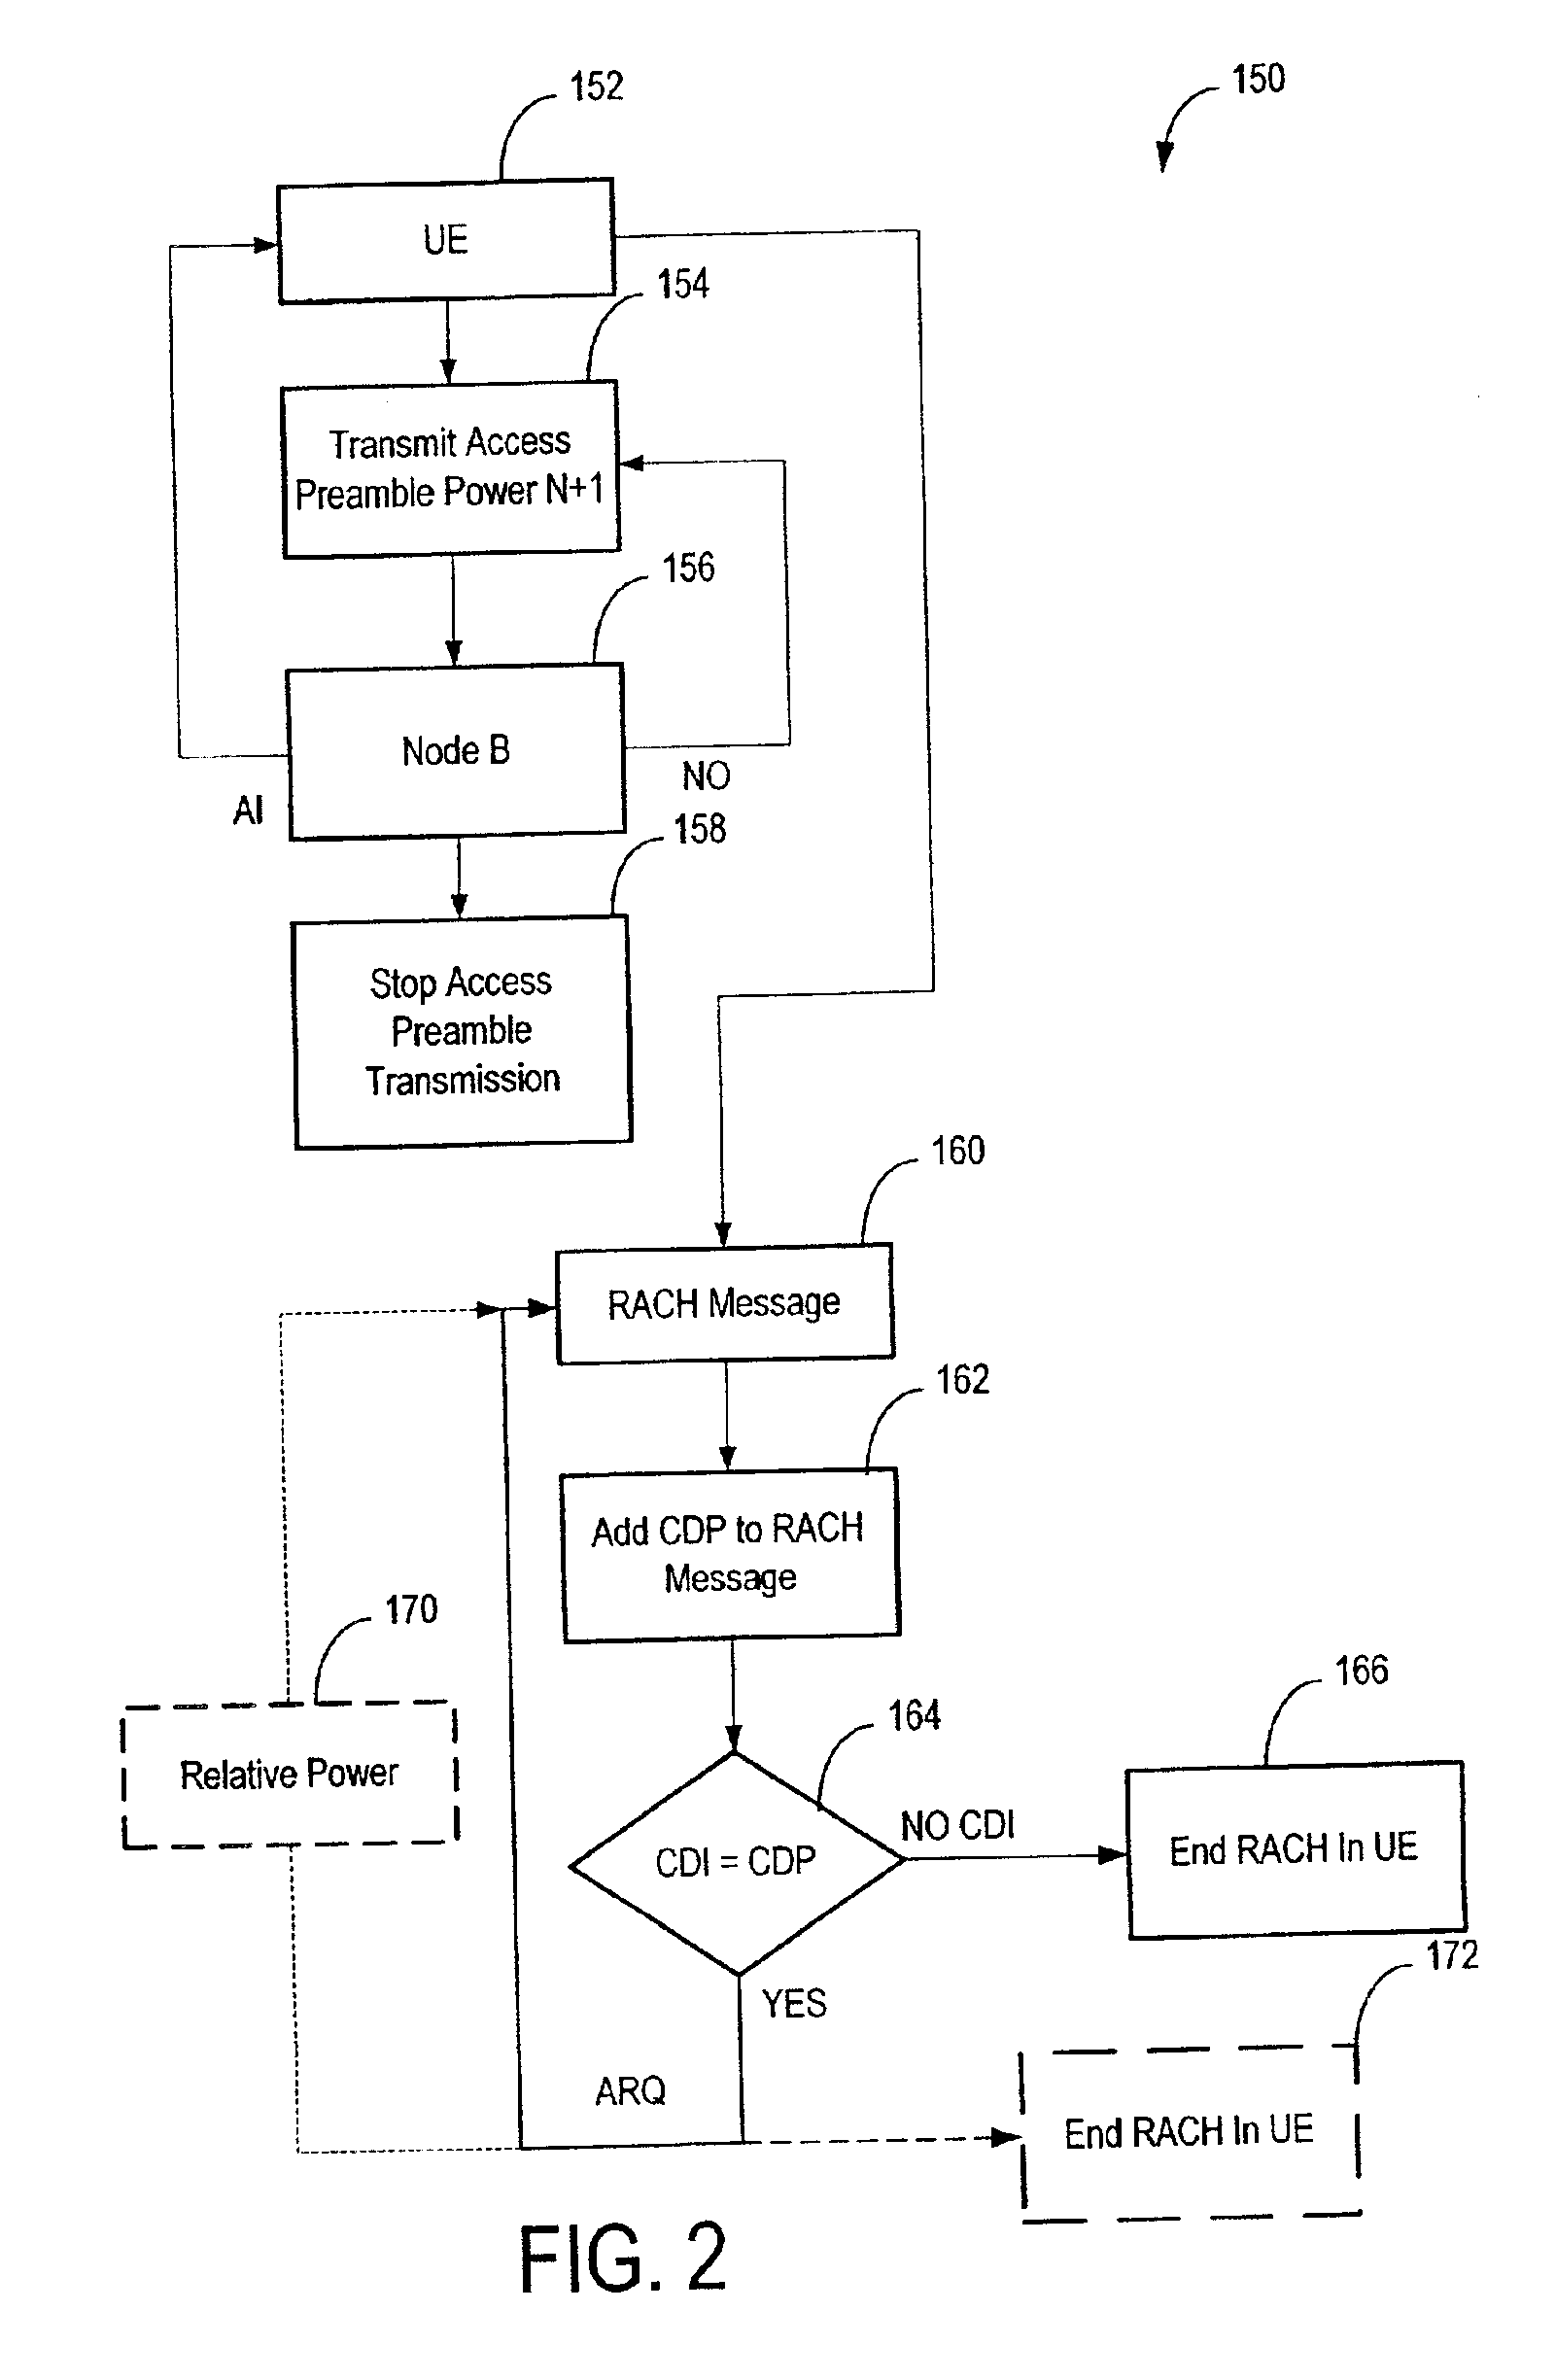 System and method for random access channel capture with automatic retransmission request